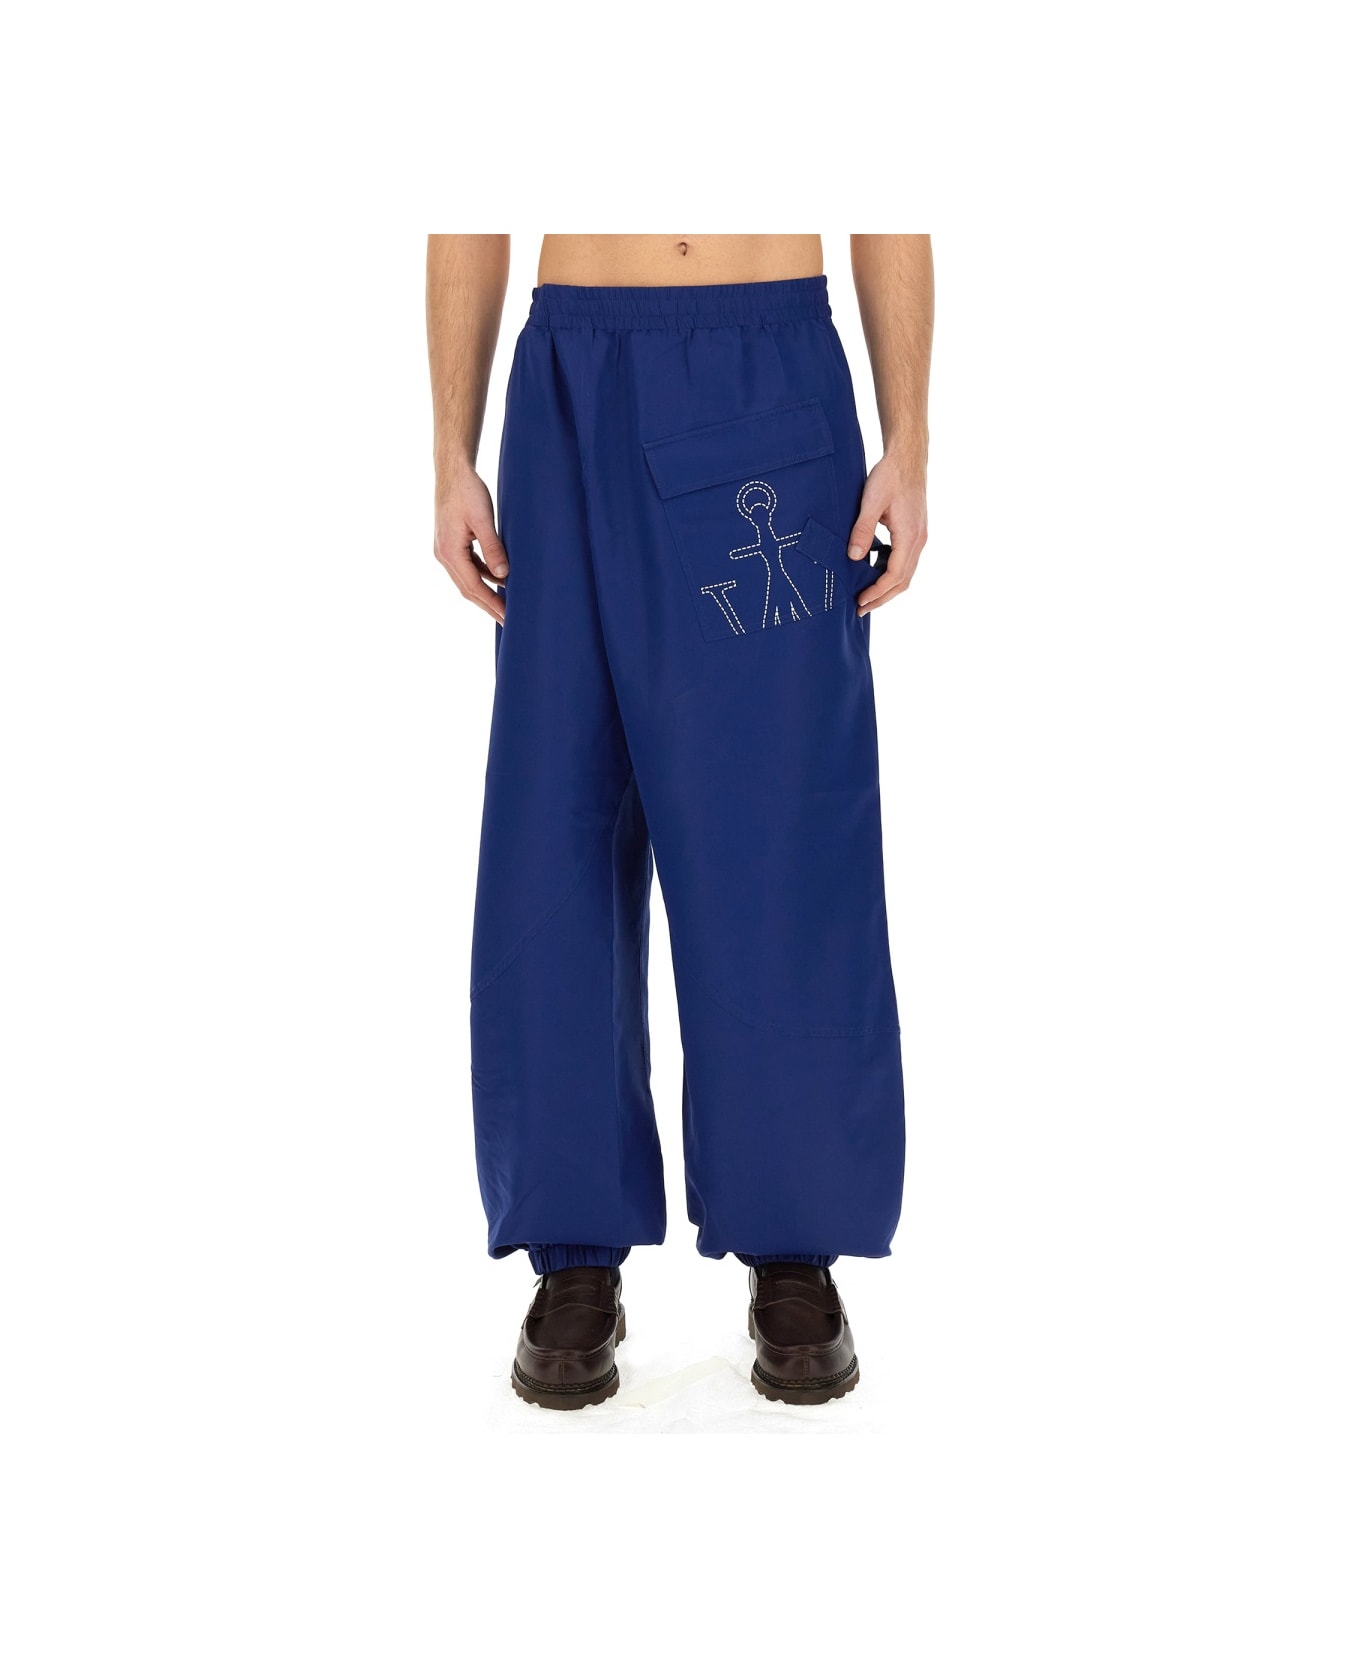 J.W. Anderson Joggers Pants With Logo Anchor - Airforce blue